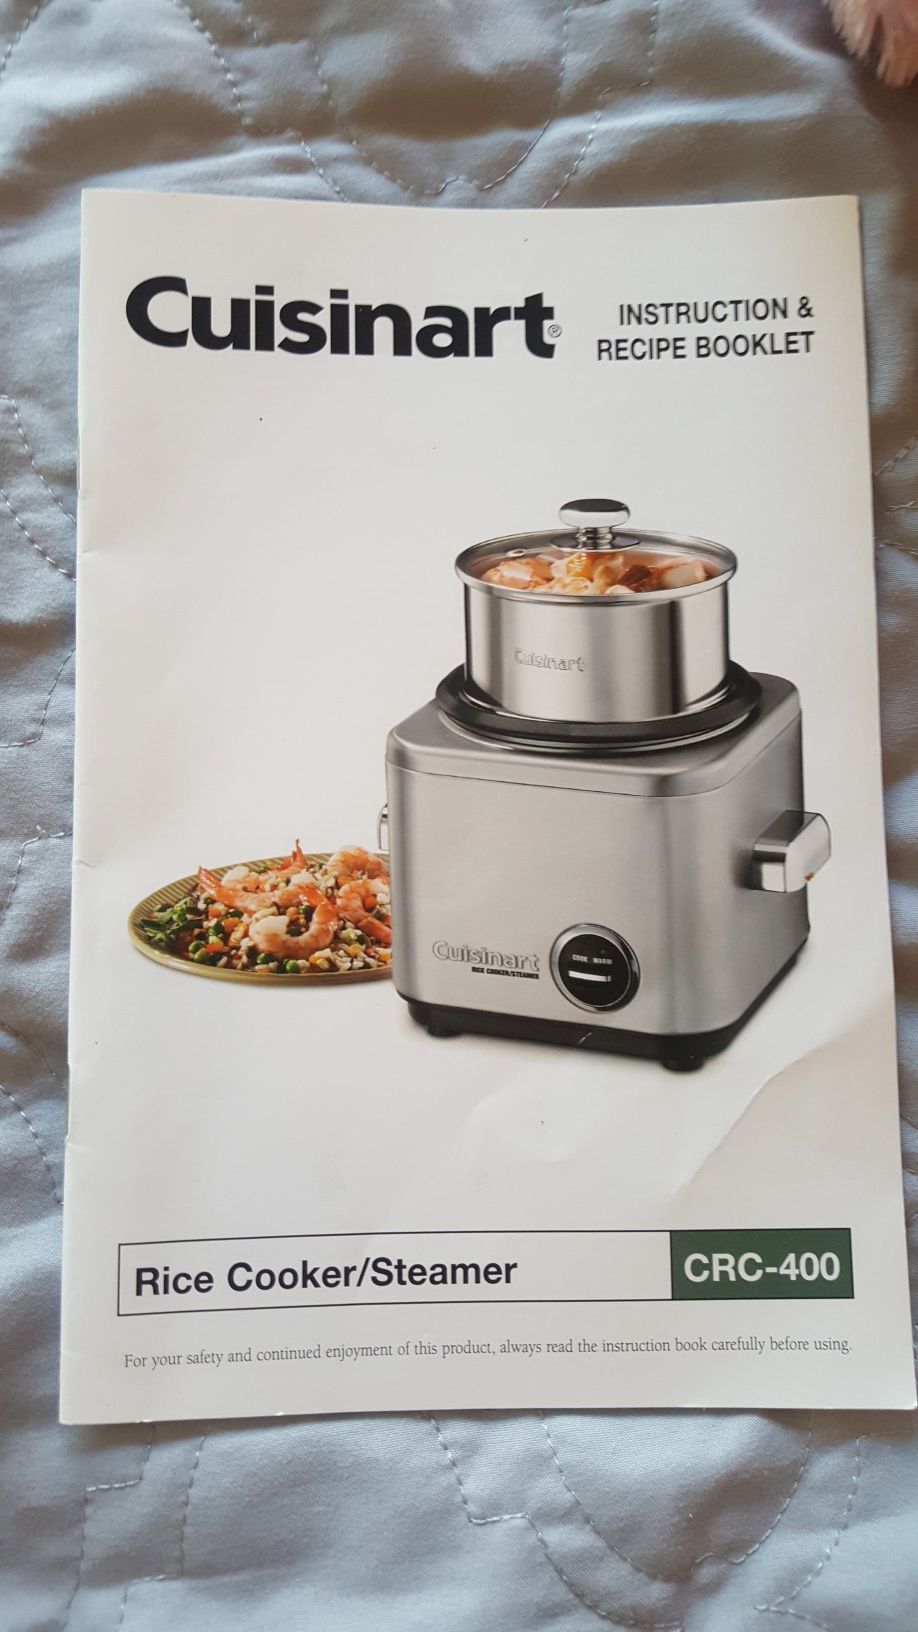 Cuisinart rice cooker and steamer